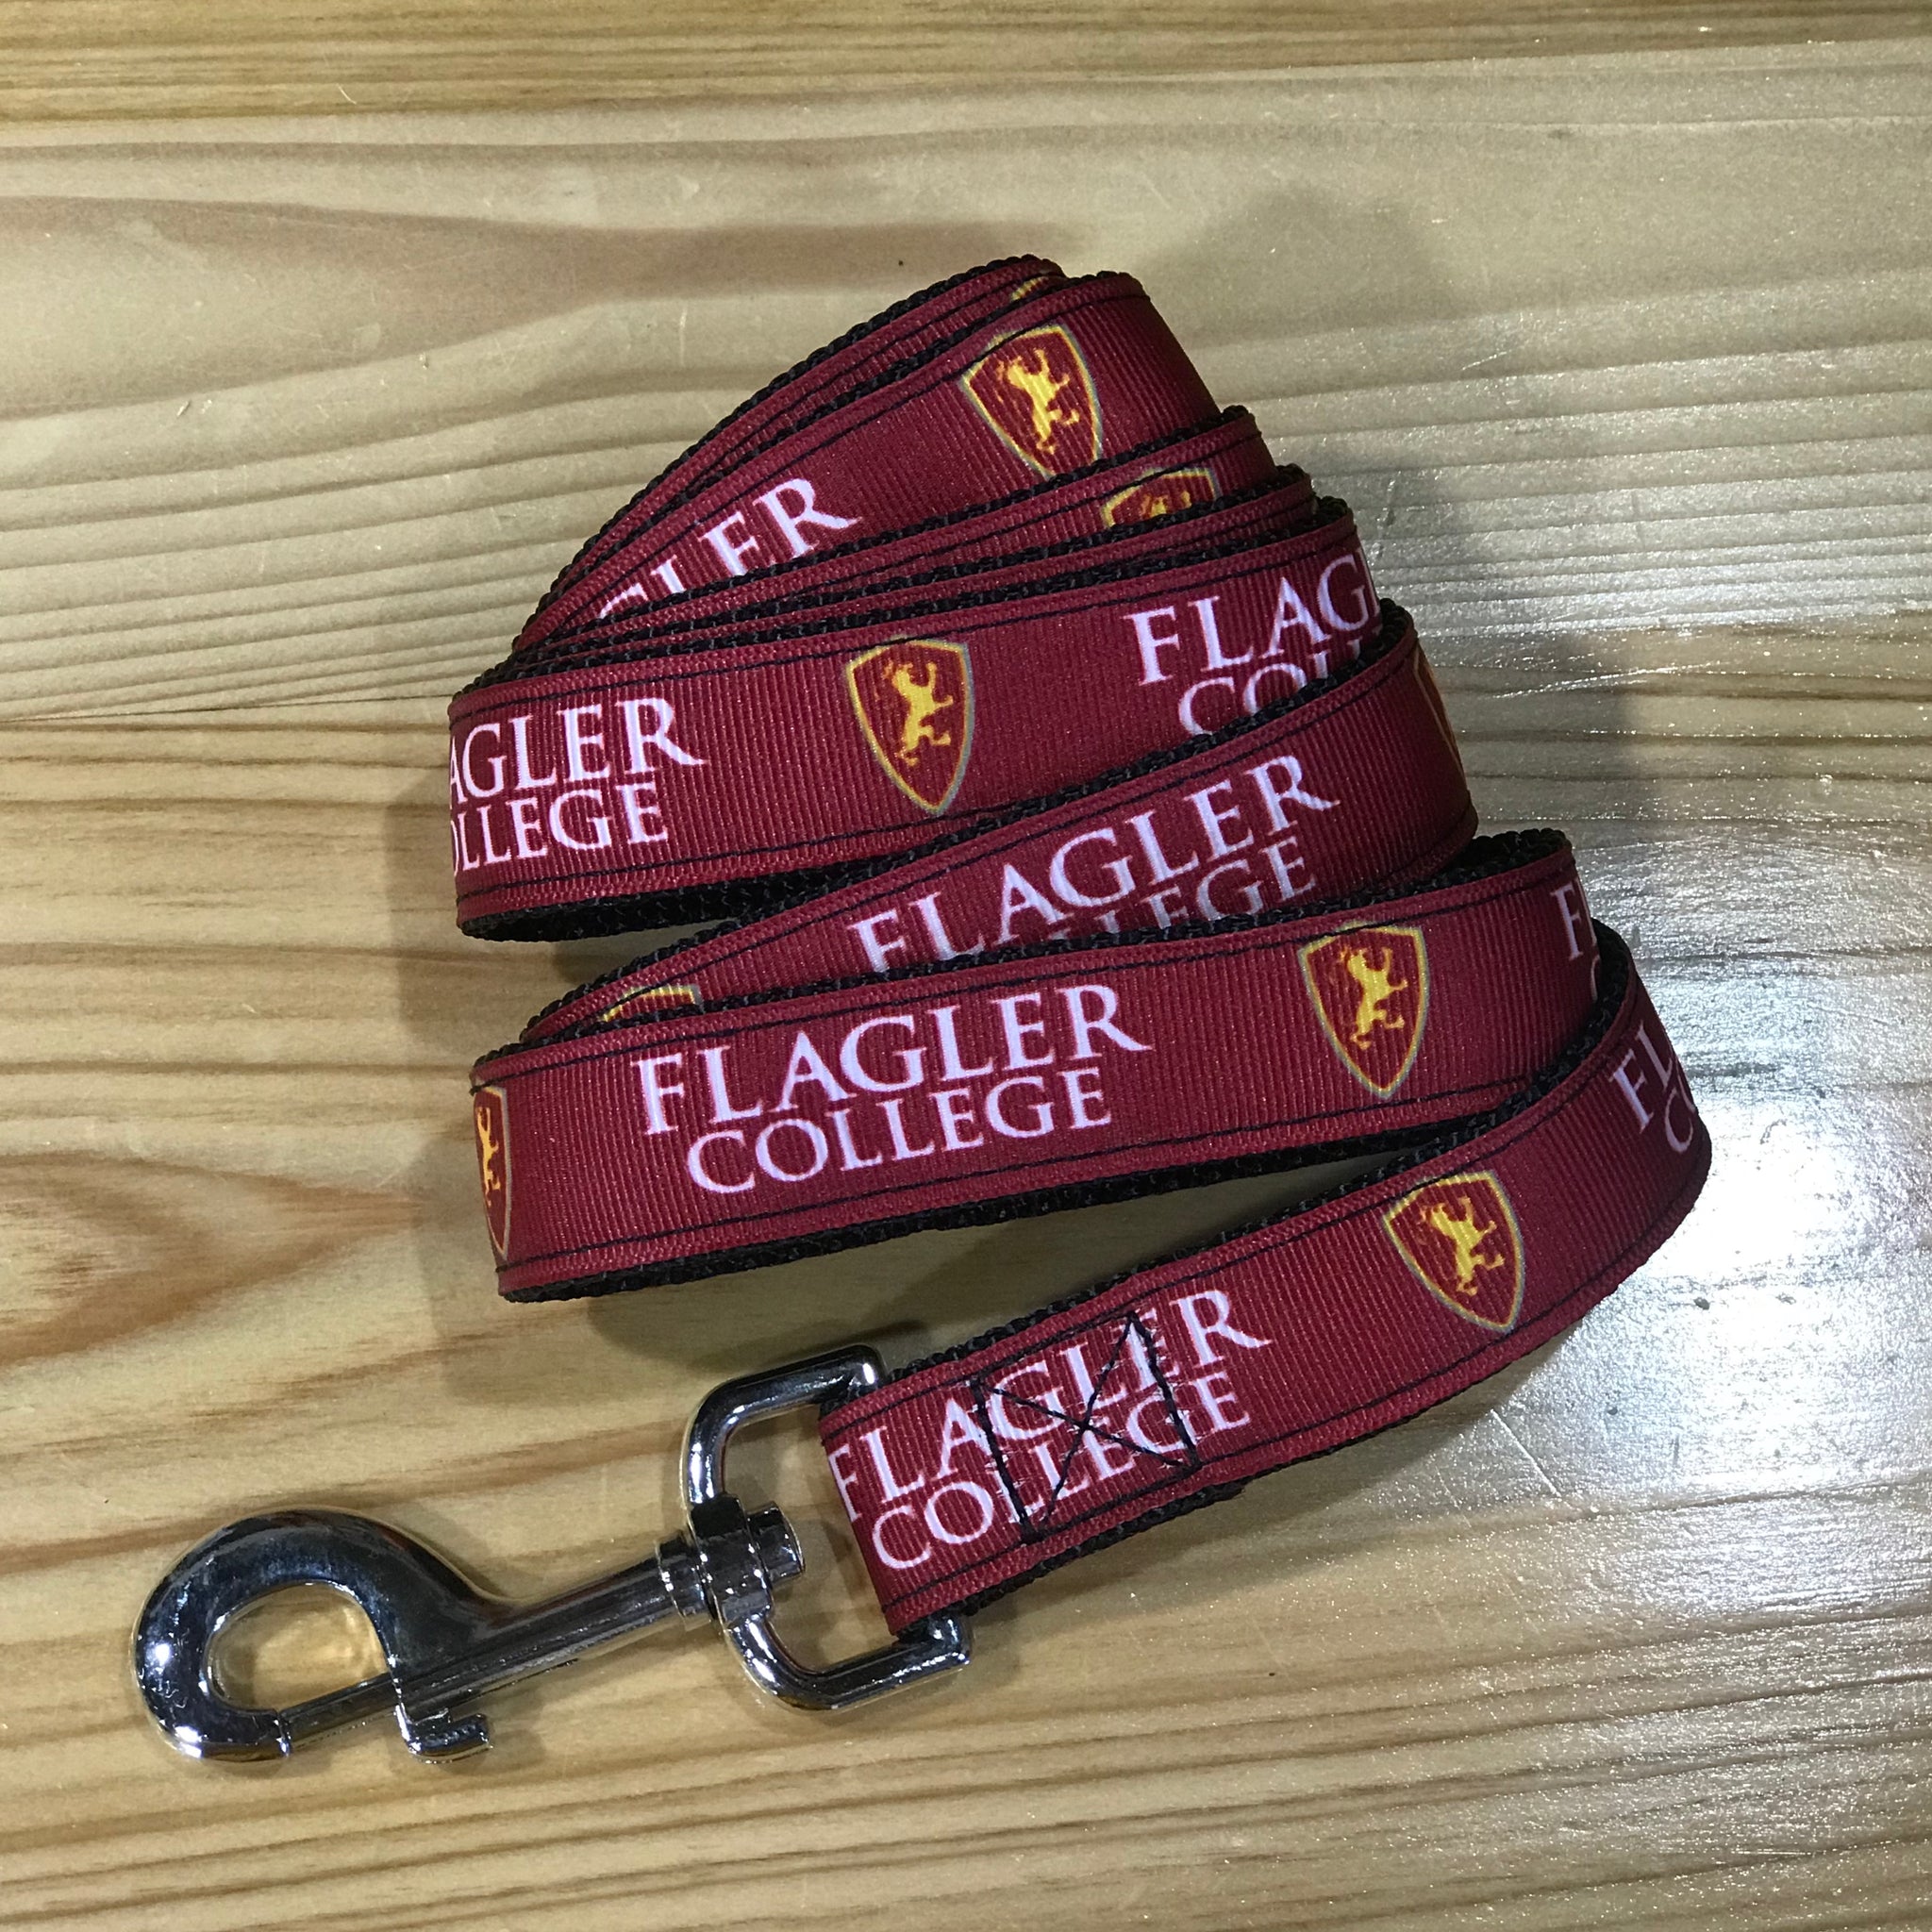 red dog leash with Flagler college printed in white and shield printed in red and yellow